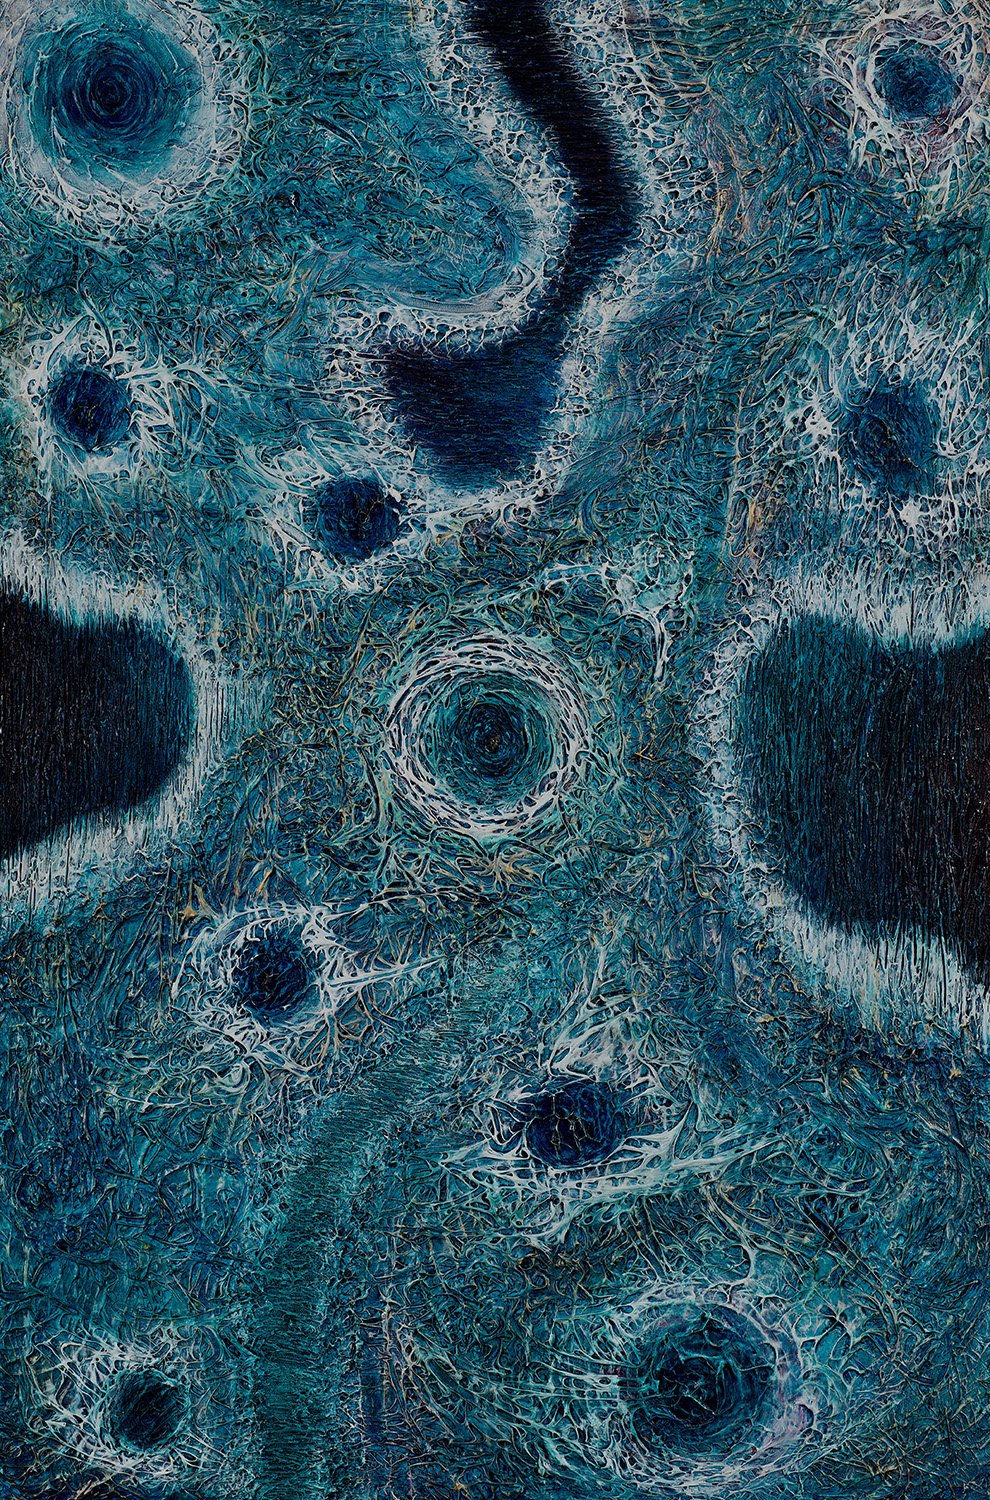   Formation of MaMus , 1995-2000, mixed media on canvas, 36” x 24” Private Collection 